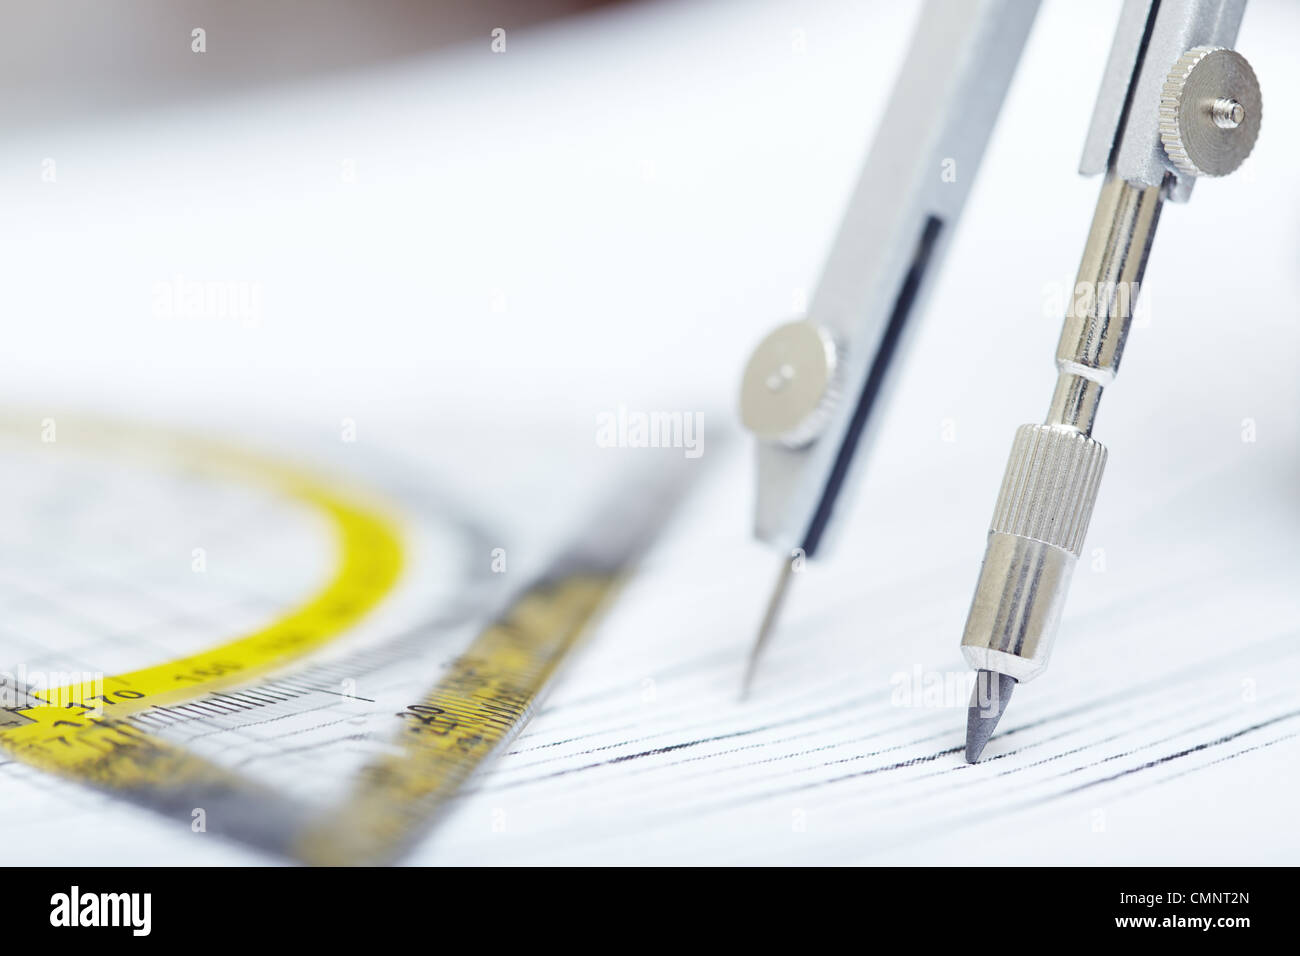 Compasses and ruler on a graphic. Extremely close-up photo Stock Photo